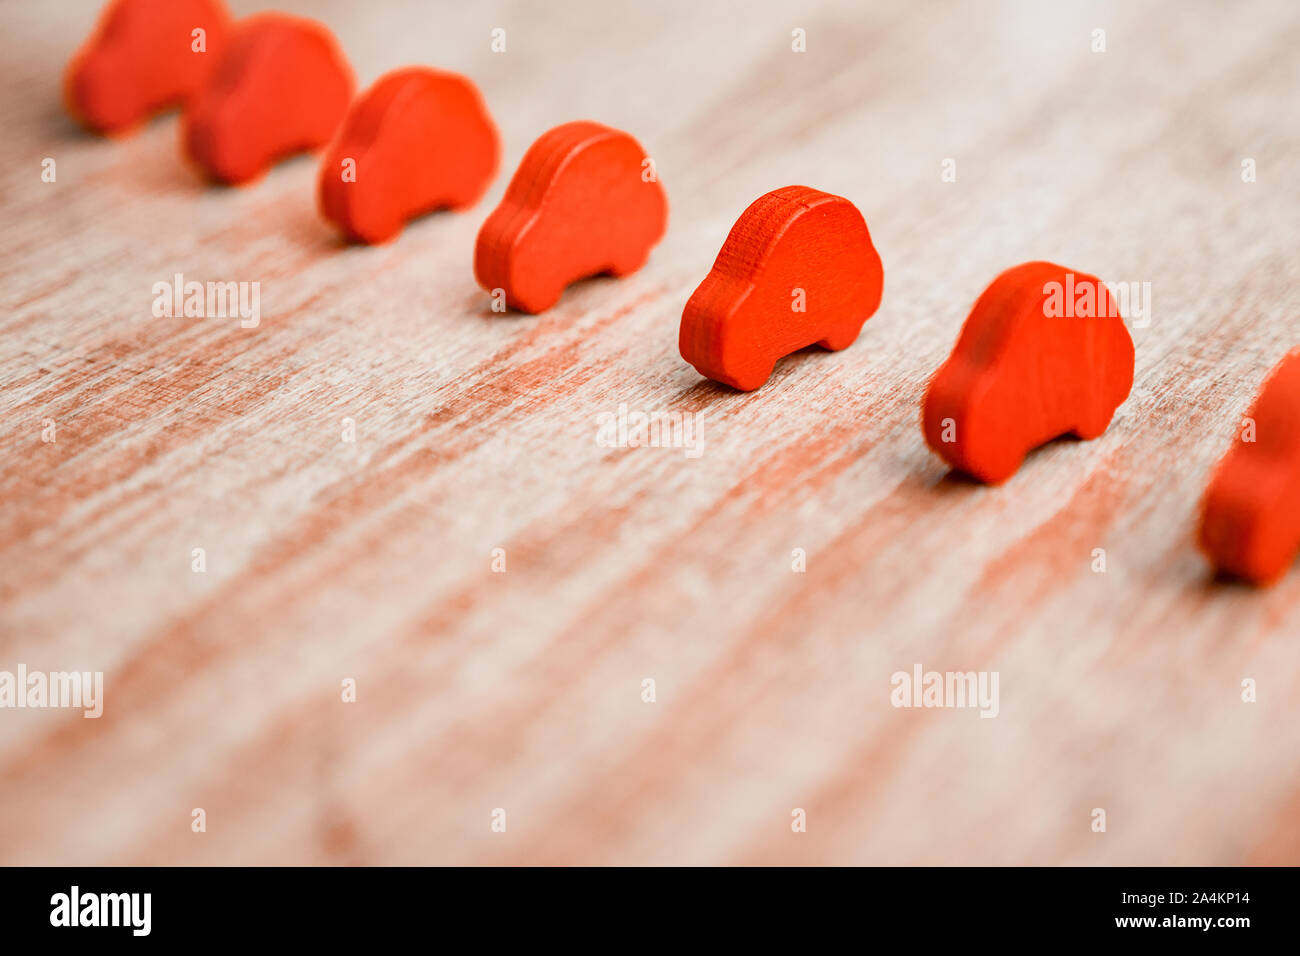 Tendering or competition for the contract. Red toy cars on wooden background. Equal conditions. Level playing field. Competition, contest background. Stock Photo